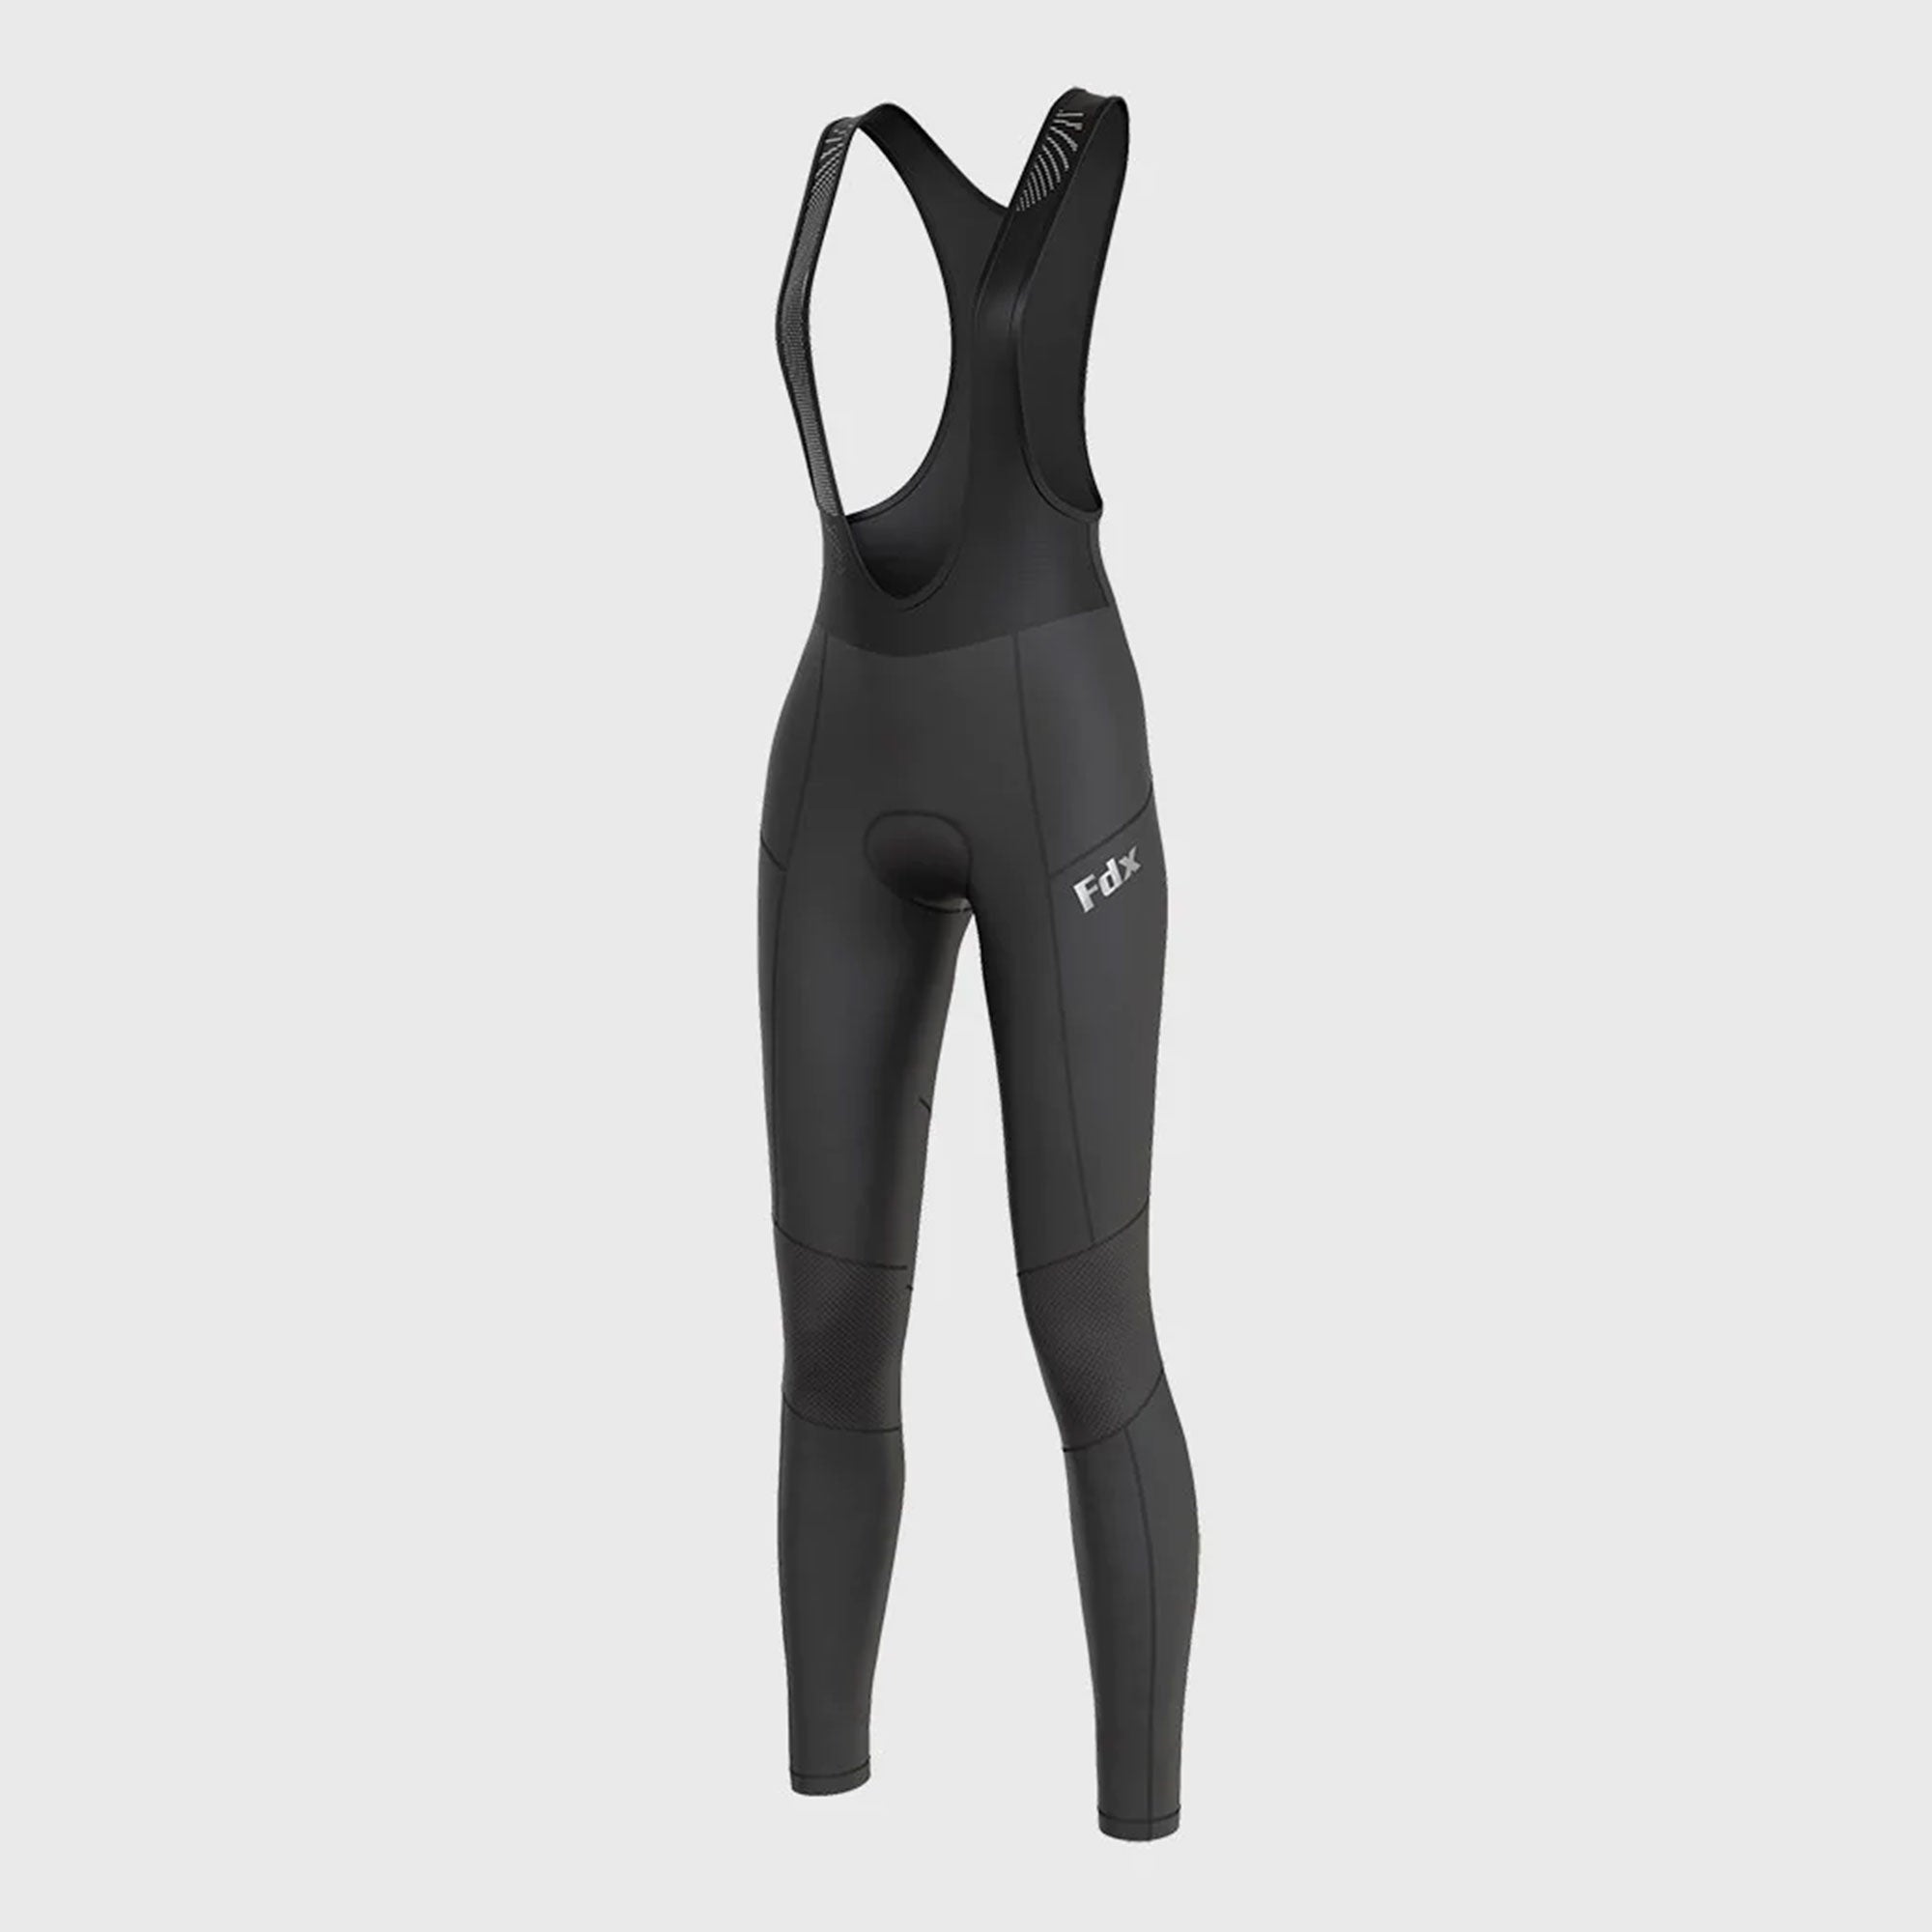 WOMEN Cycling Tights Winter Thermal Padded Trousers Legging LADIES